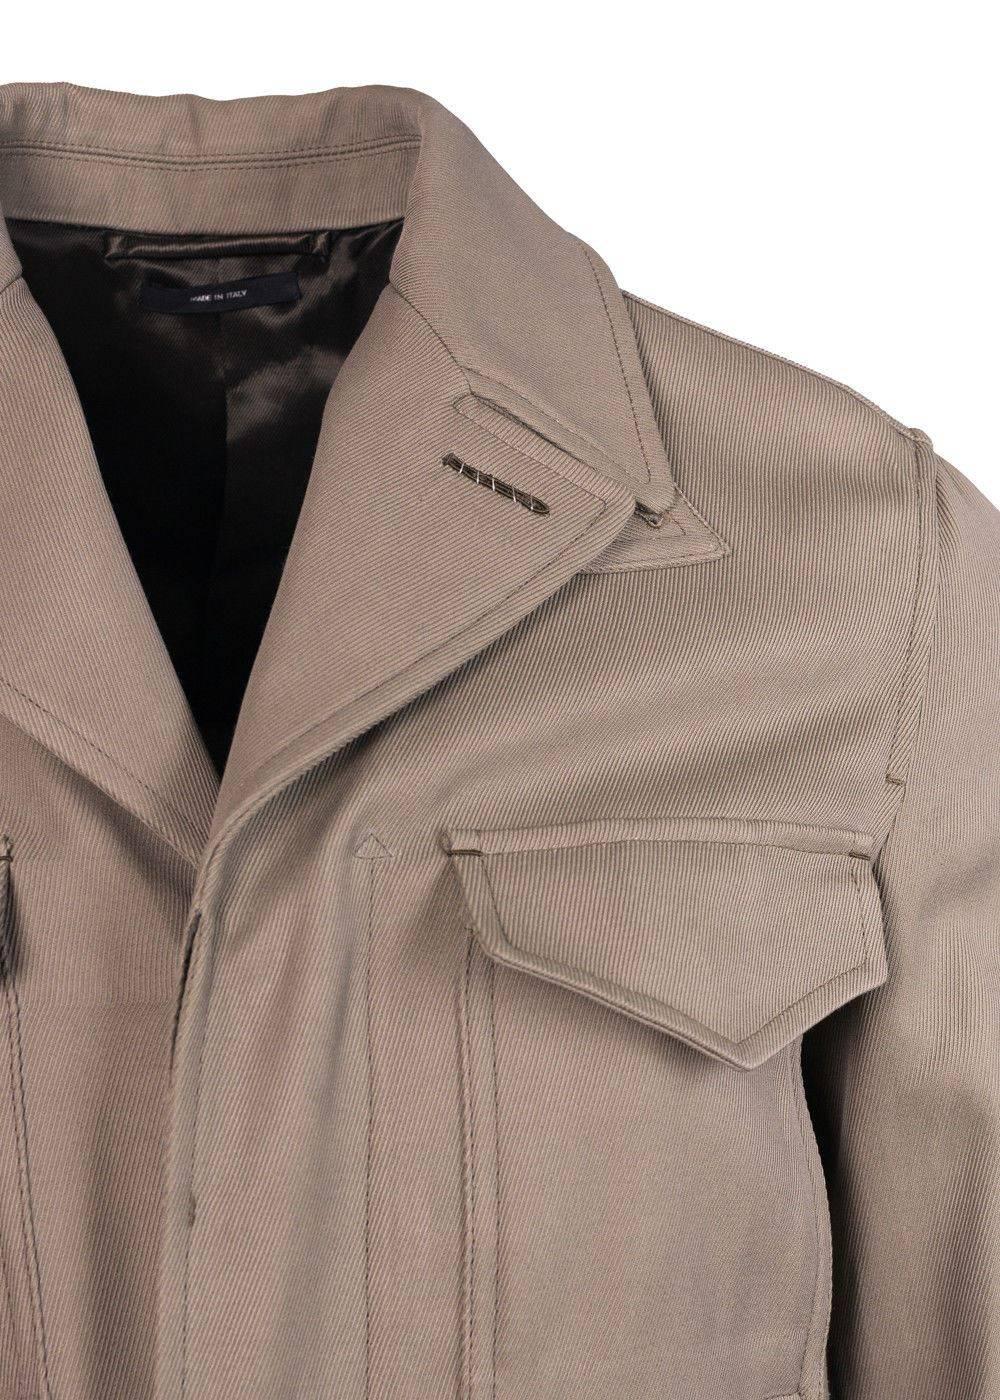 Brand New Tom Ford Twill Safari Jacket
Original Tags
Retails in Stores & Online for $2250
Men's Size EUR 48 / US 38 Fits True to Size

Embrace nature with a touch of class in your Tom Ford Safari Jacket. This thick twill jacket features four deep